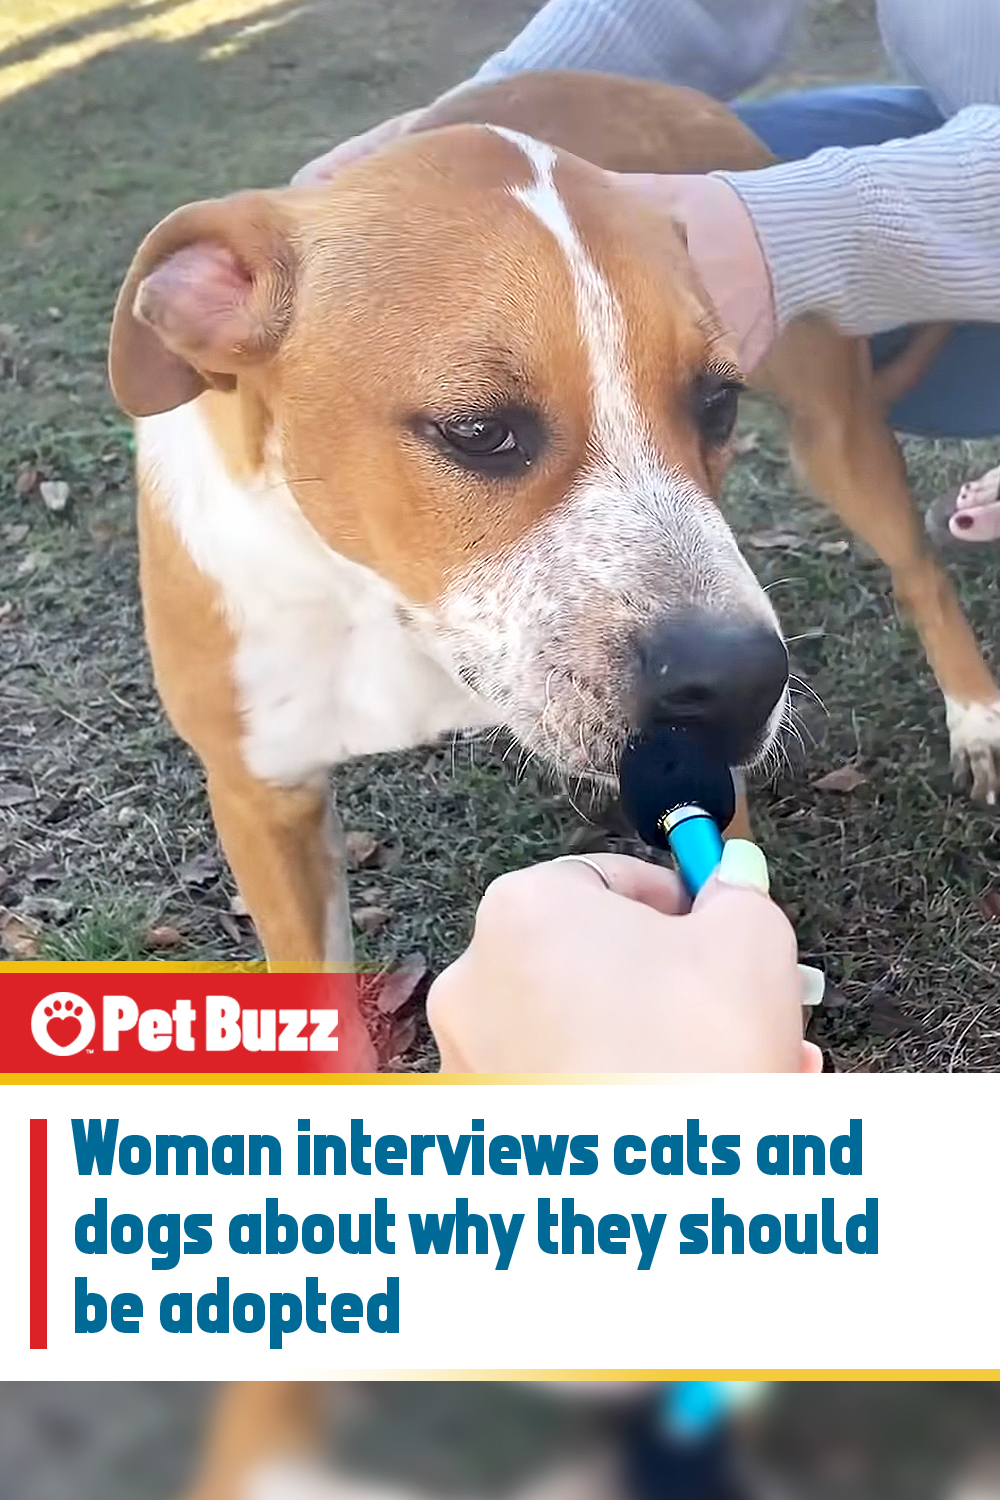 Woman interviews cats and dogs about why they should be adopted